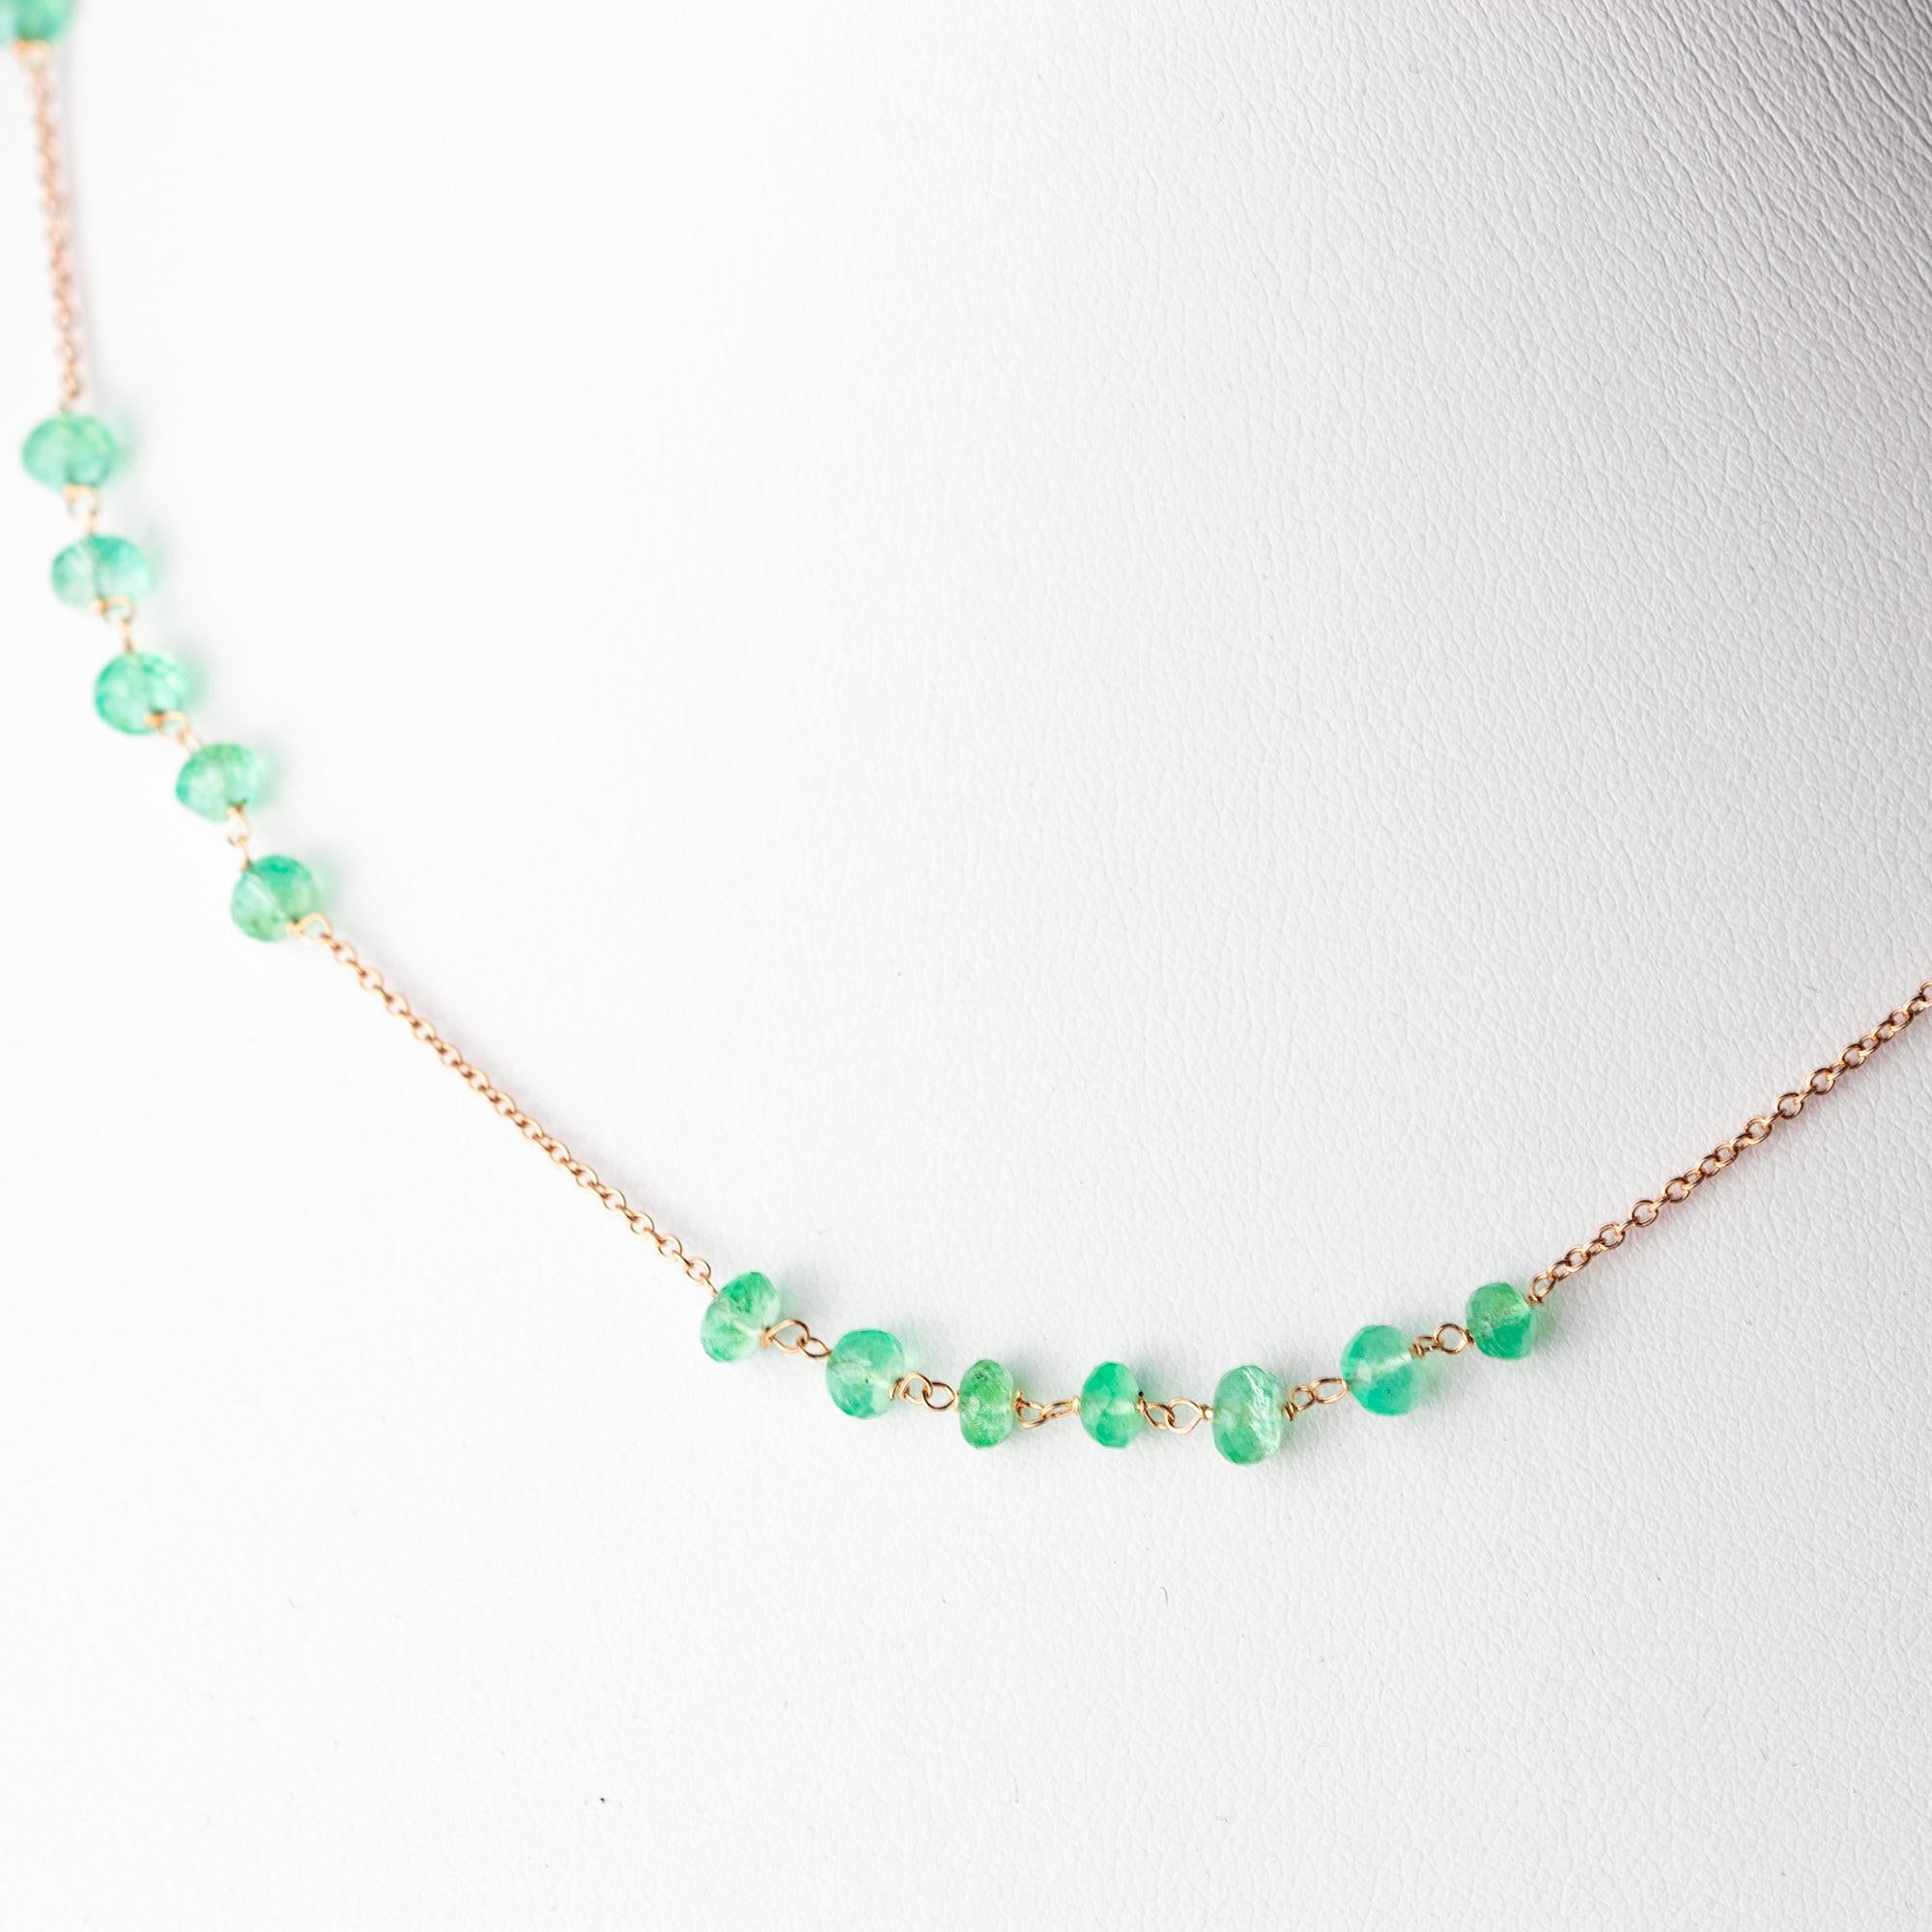 Delight yourself with a luminous handmade jewelry. An emerald necklace full of design. A modern and delicate style for a young and fearless woman. A modern and artisan rondelle cut emeralds immersed in a 18 karat  pink / rose gold chain. The perfect